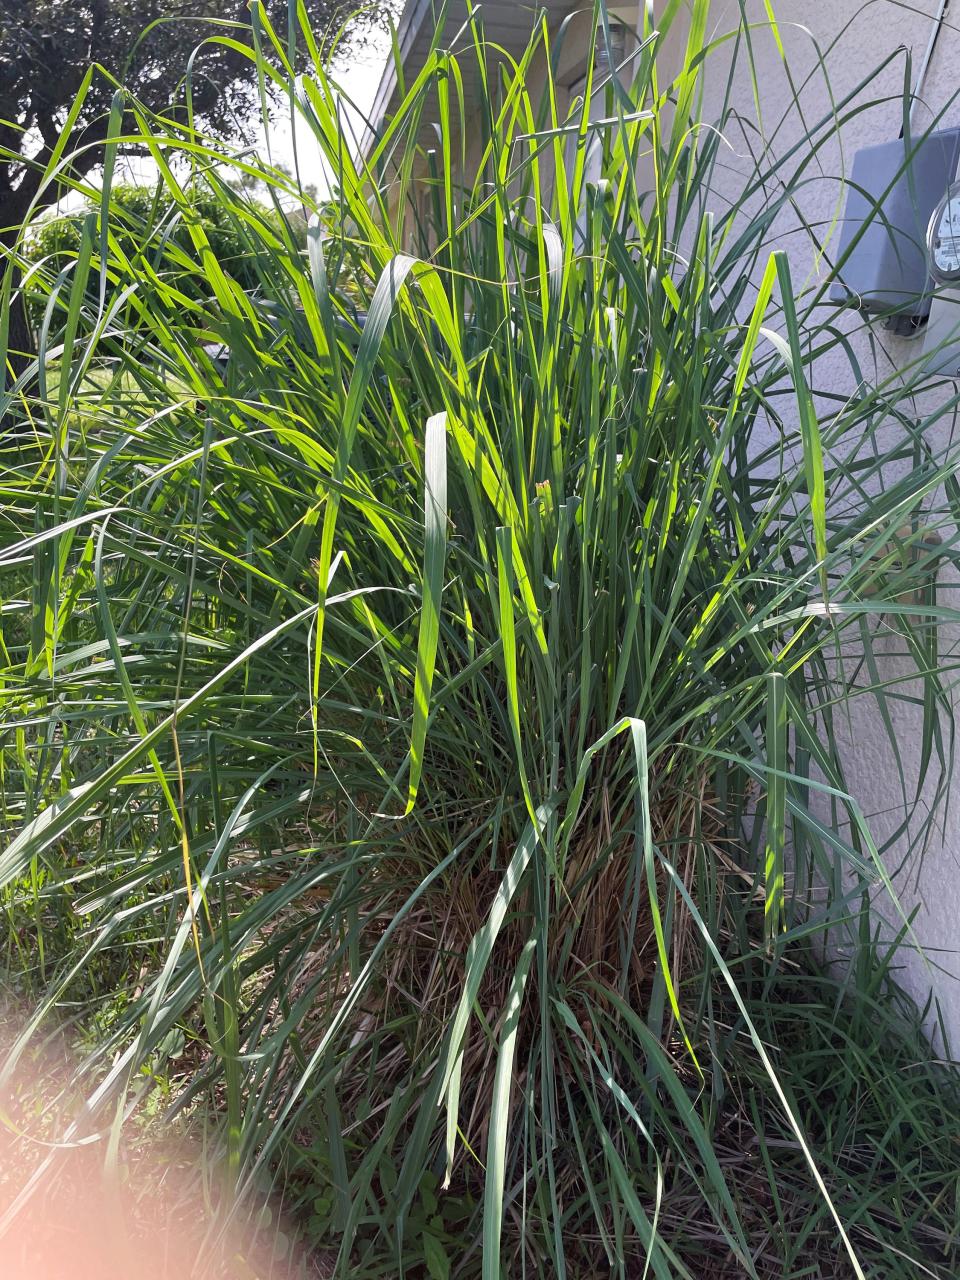 Ornamental grasses can provide texture and variety to offset your flowering plants. They come in multiple shapes, heights, and foliage colors. Grasses that are easy to care for include lemongrass.